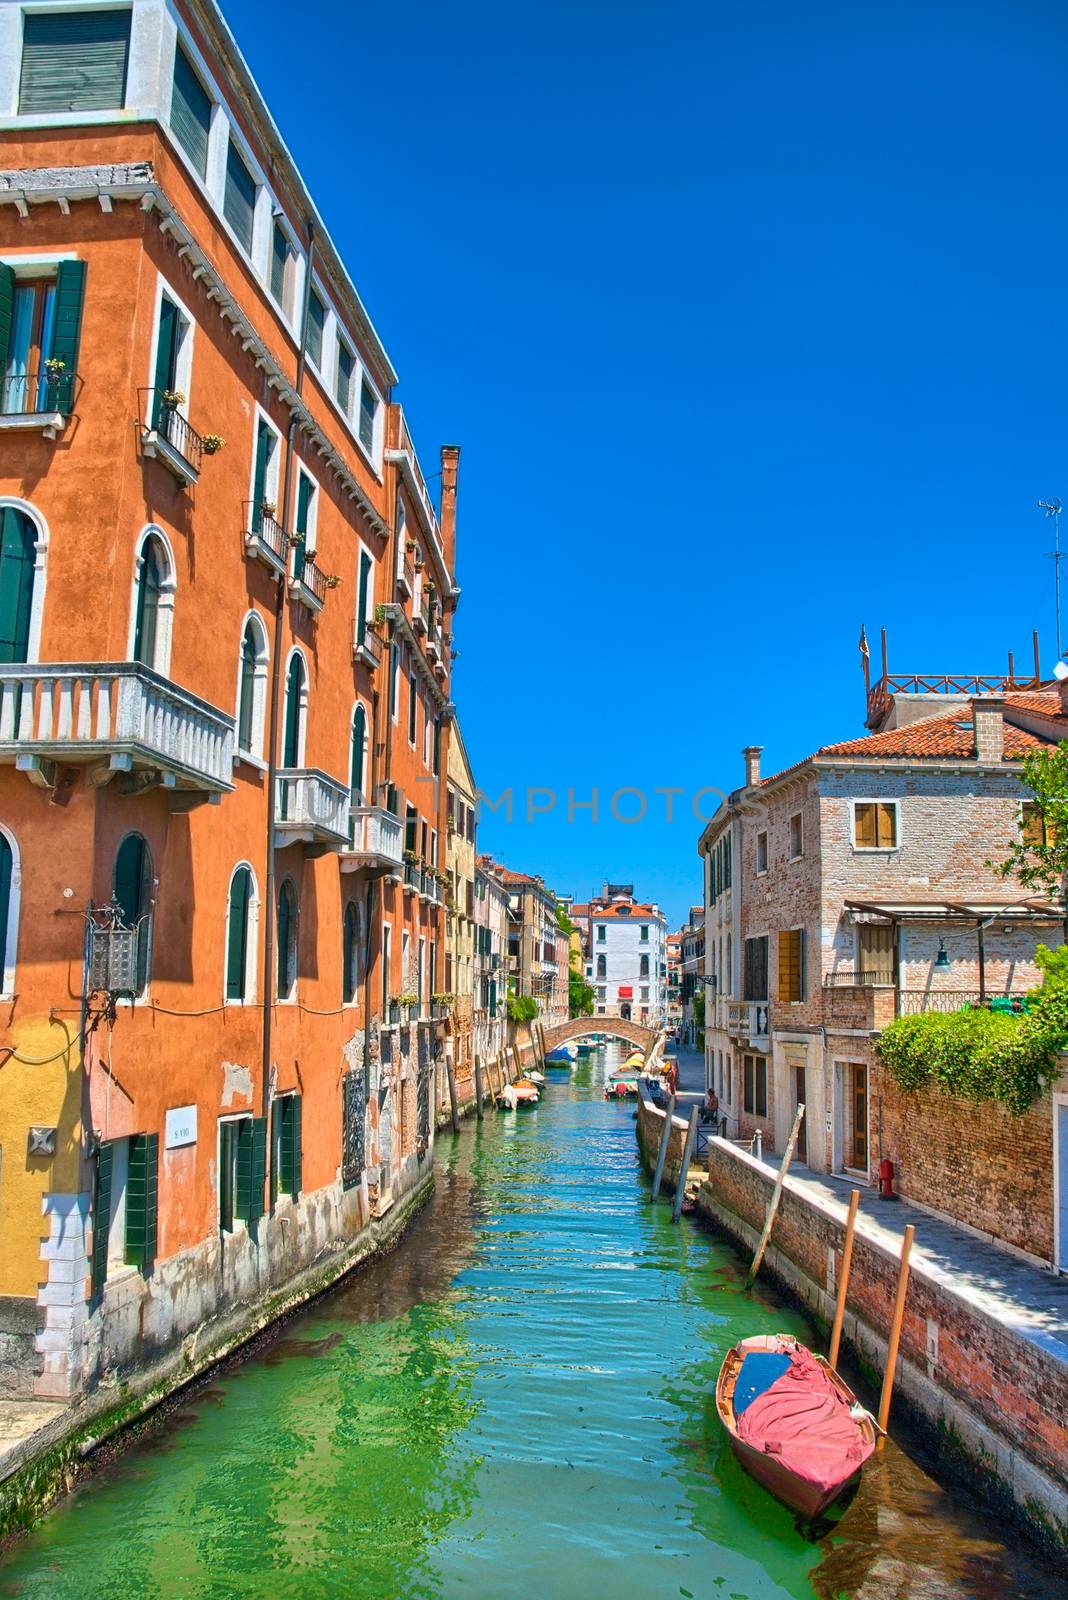 Scenic canal with boats, Venice, Italy, HDR by Eagle2308